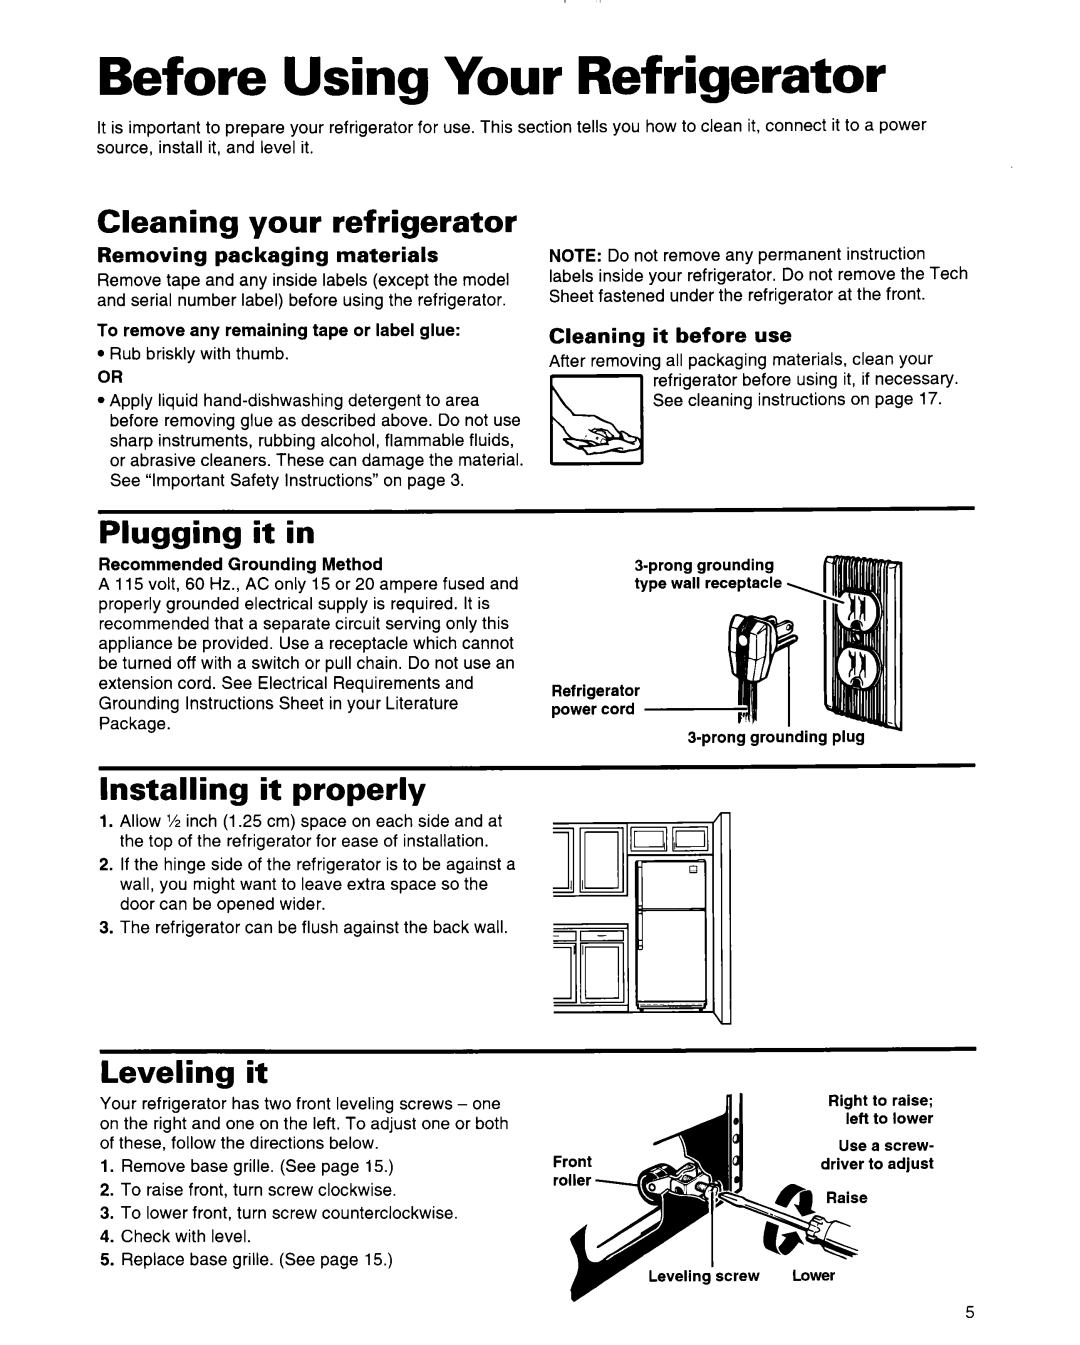 Whirlpool 2184589 Before Using Your Refrigerator, Cleaning your refrigerator, Plugging it in, Installing it properly 